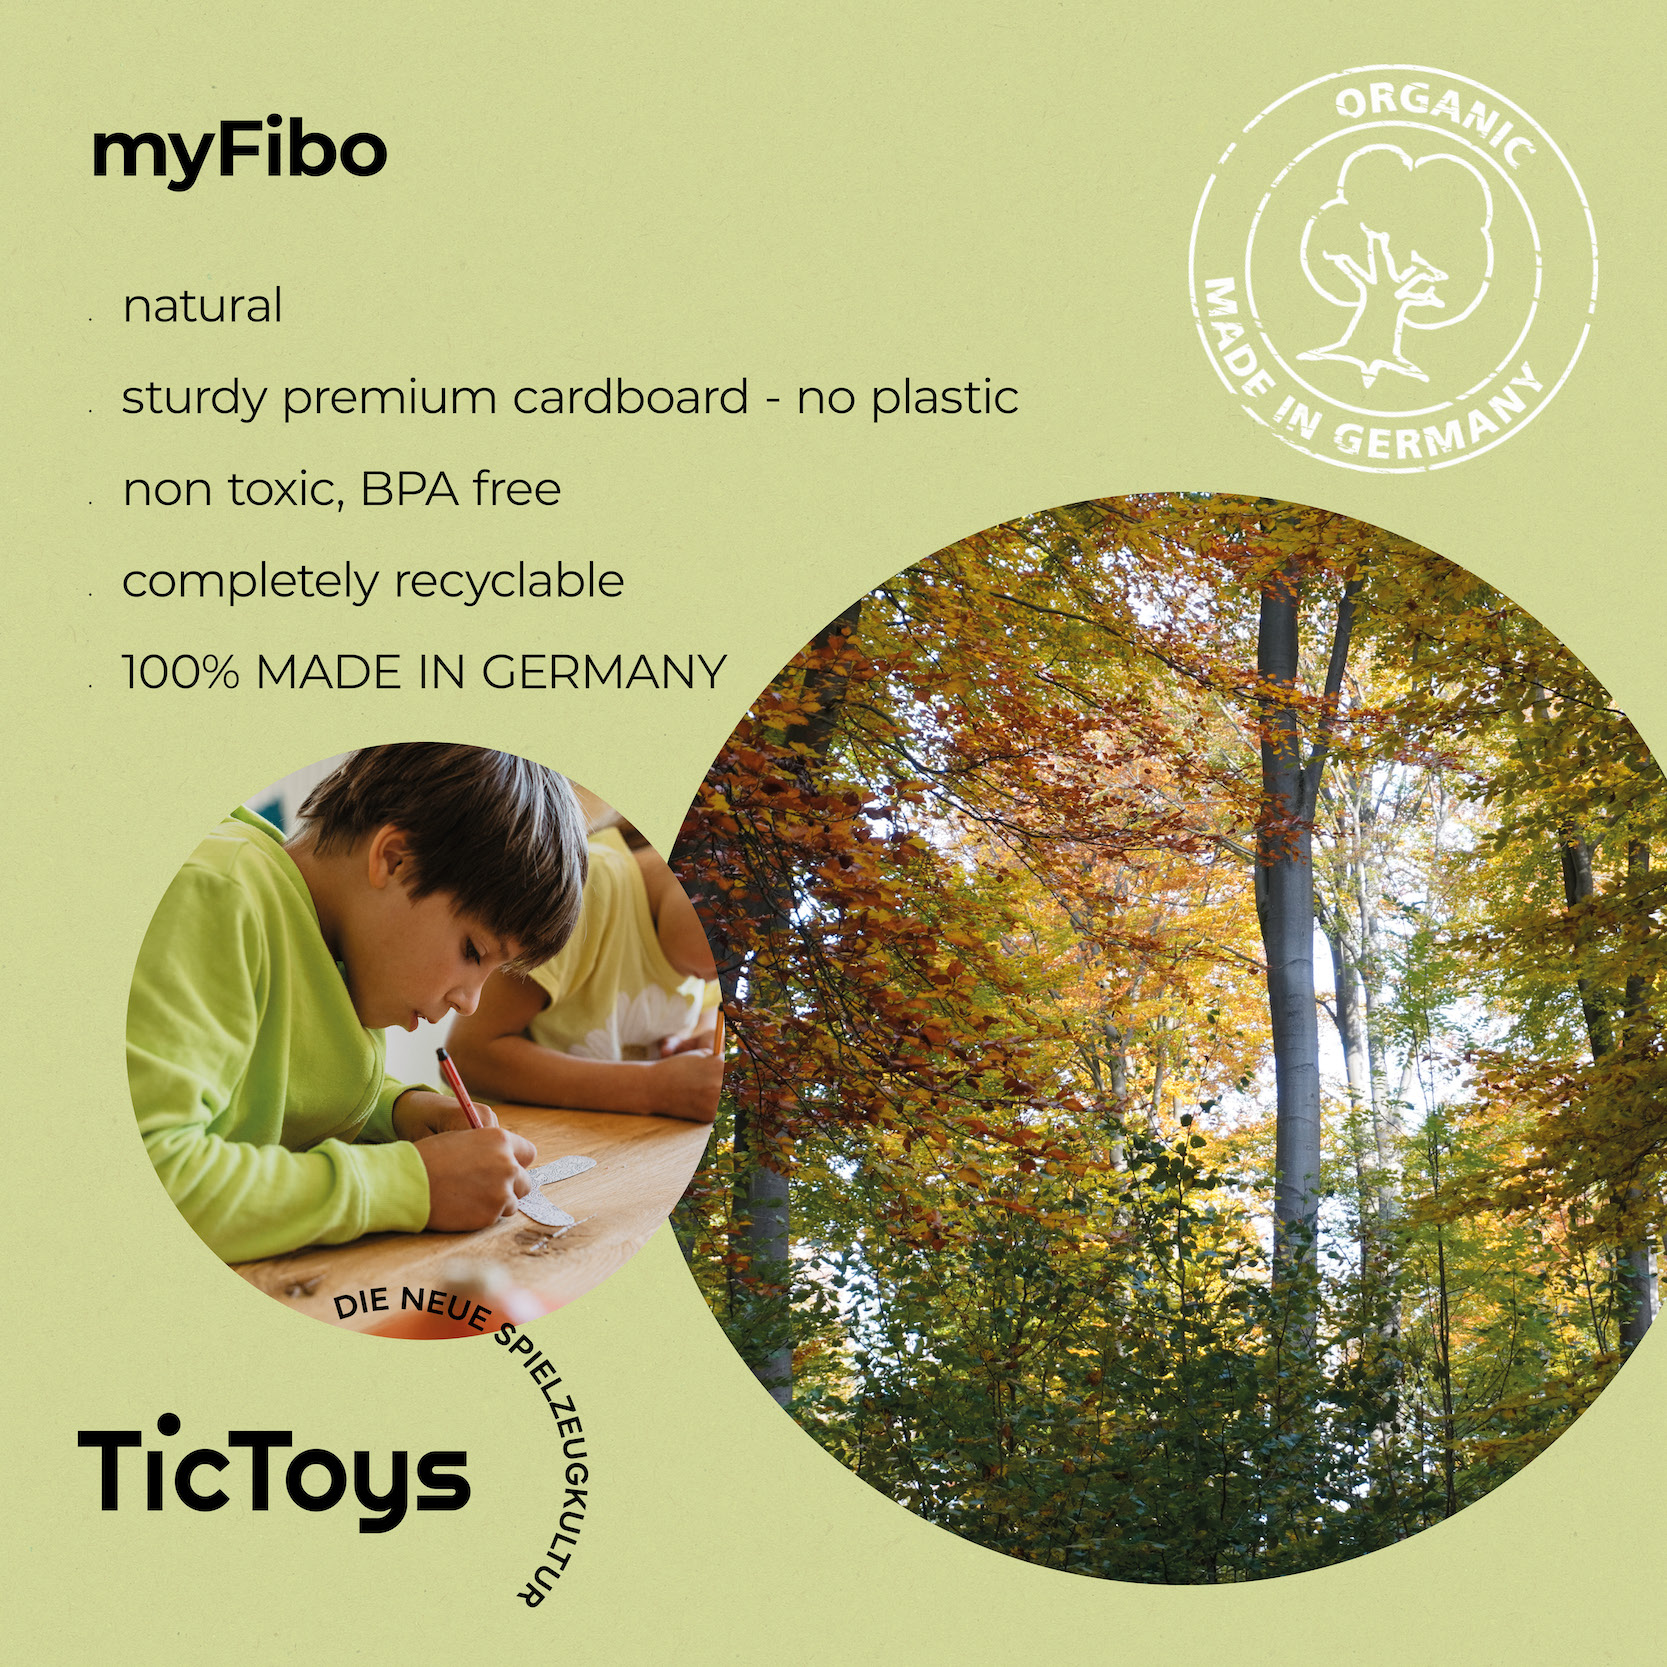 myFibo is made of cardboard and is produced in an environmentally friendly manner in Leipzig